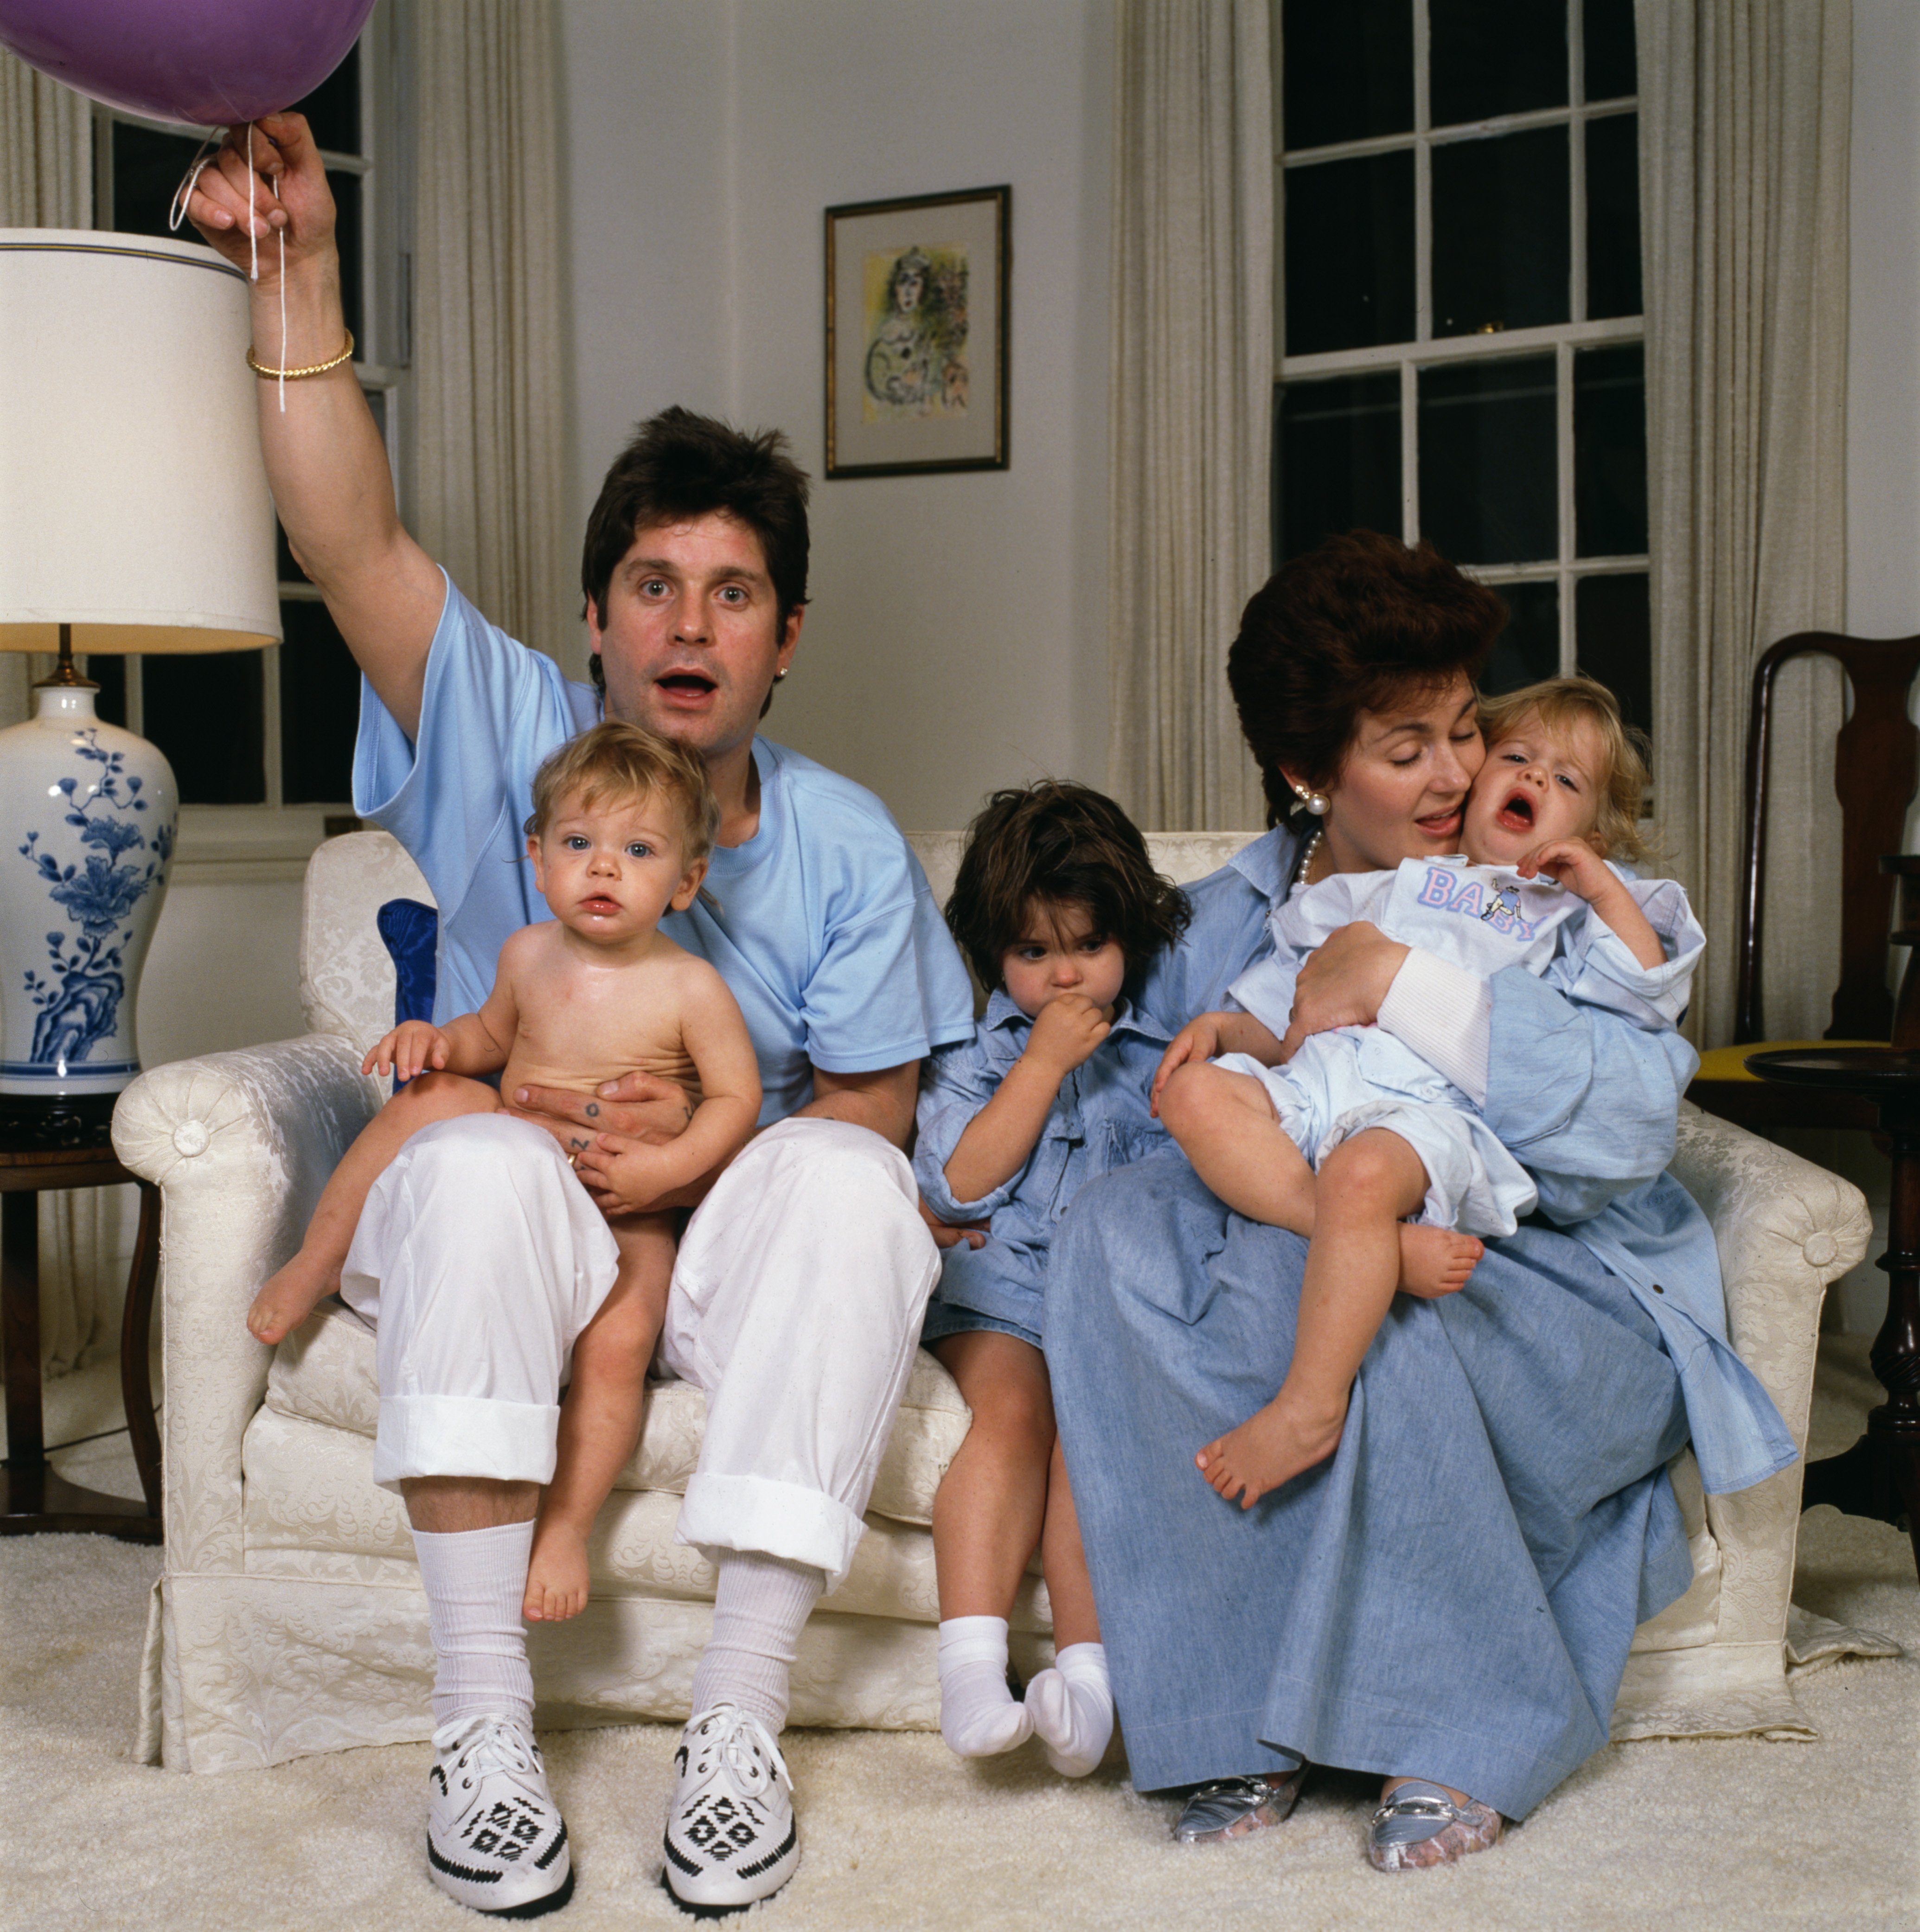 Ozzy Osbourne and his wife Sharon Osbourne pictured with their three children, Aimee, Kelly, and Jack in 1987. | Source: Getty Images